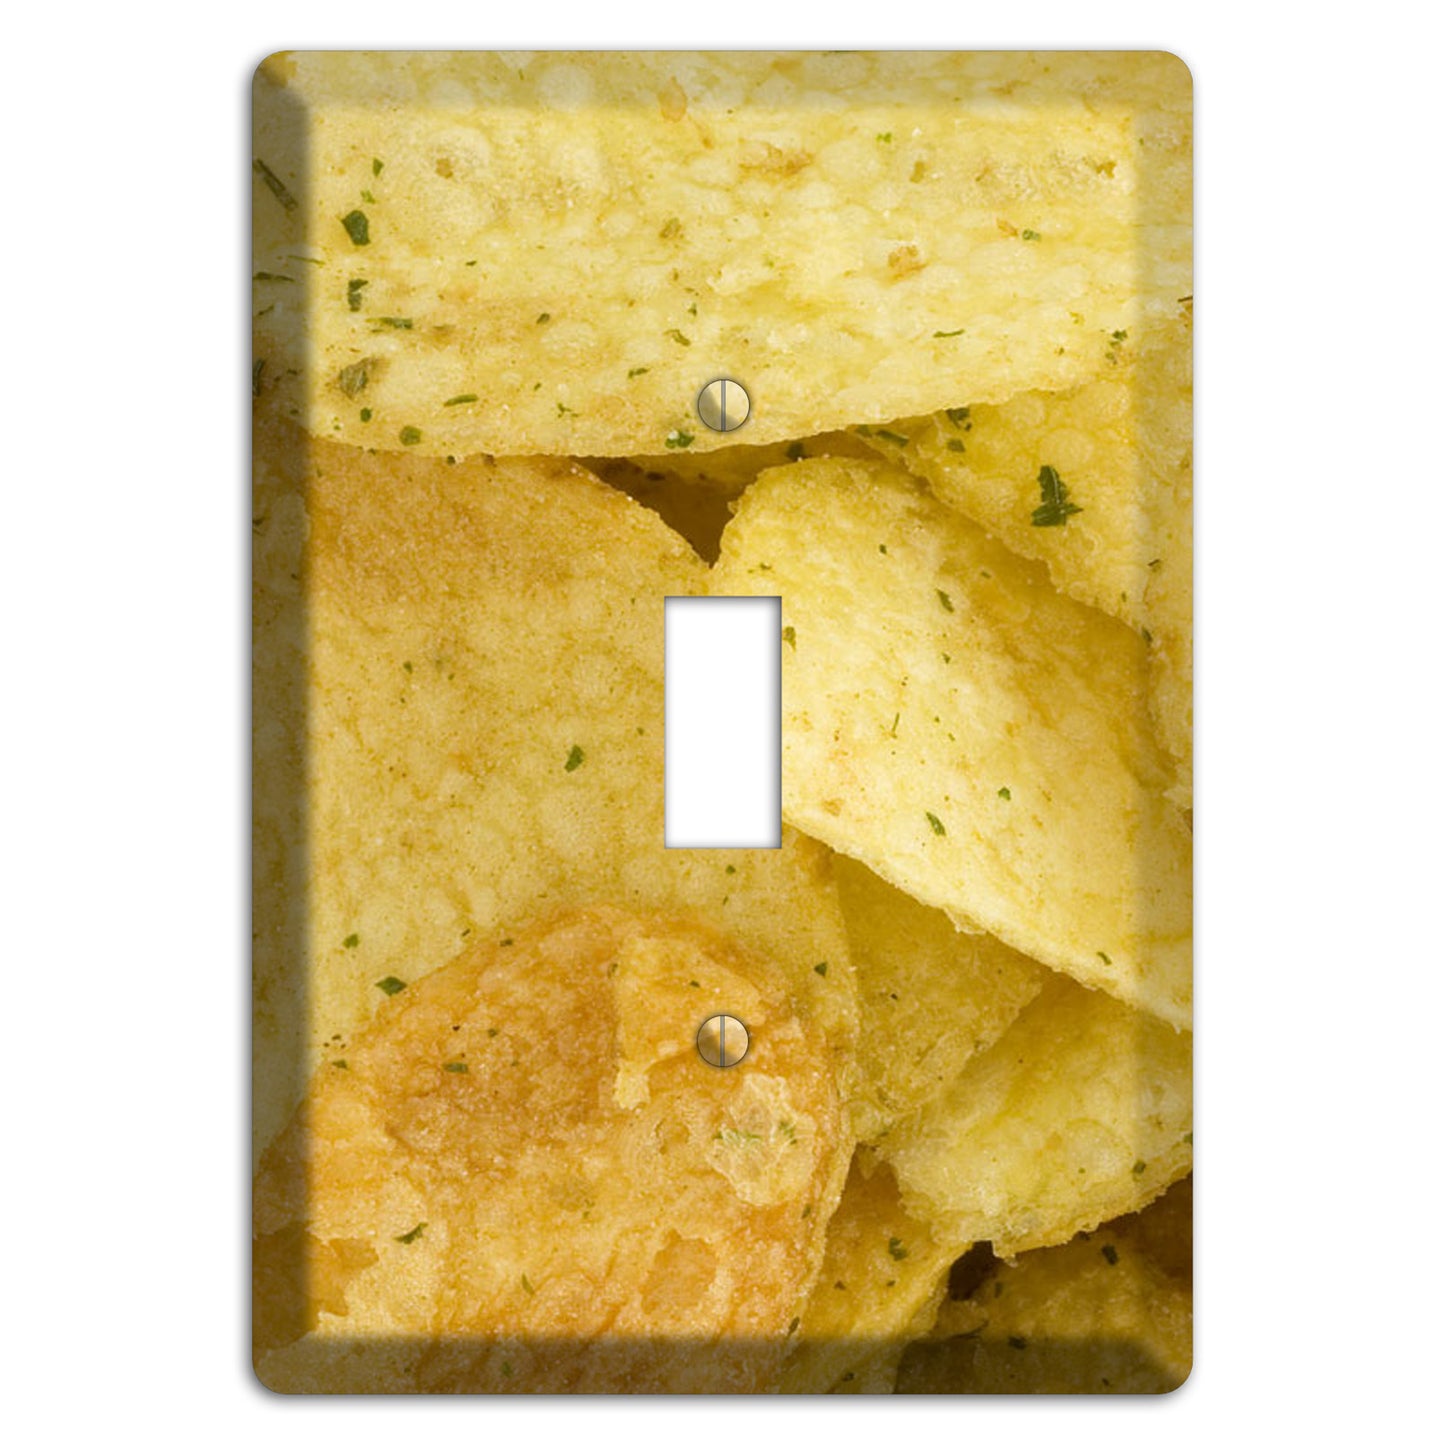 Chips Cover Plates